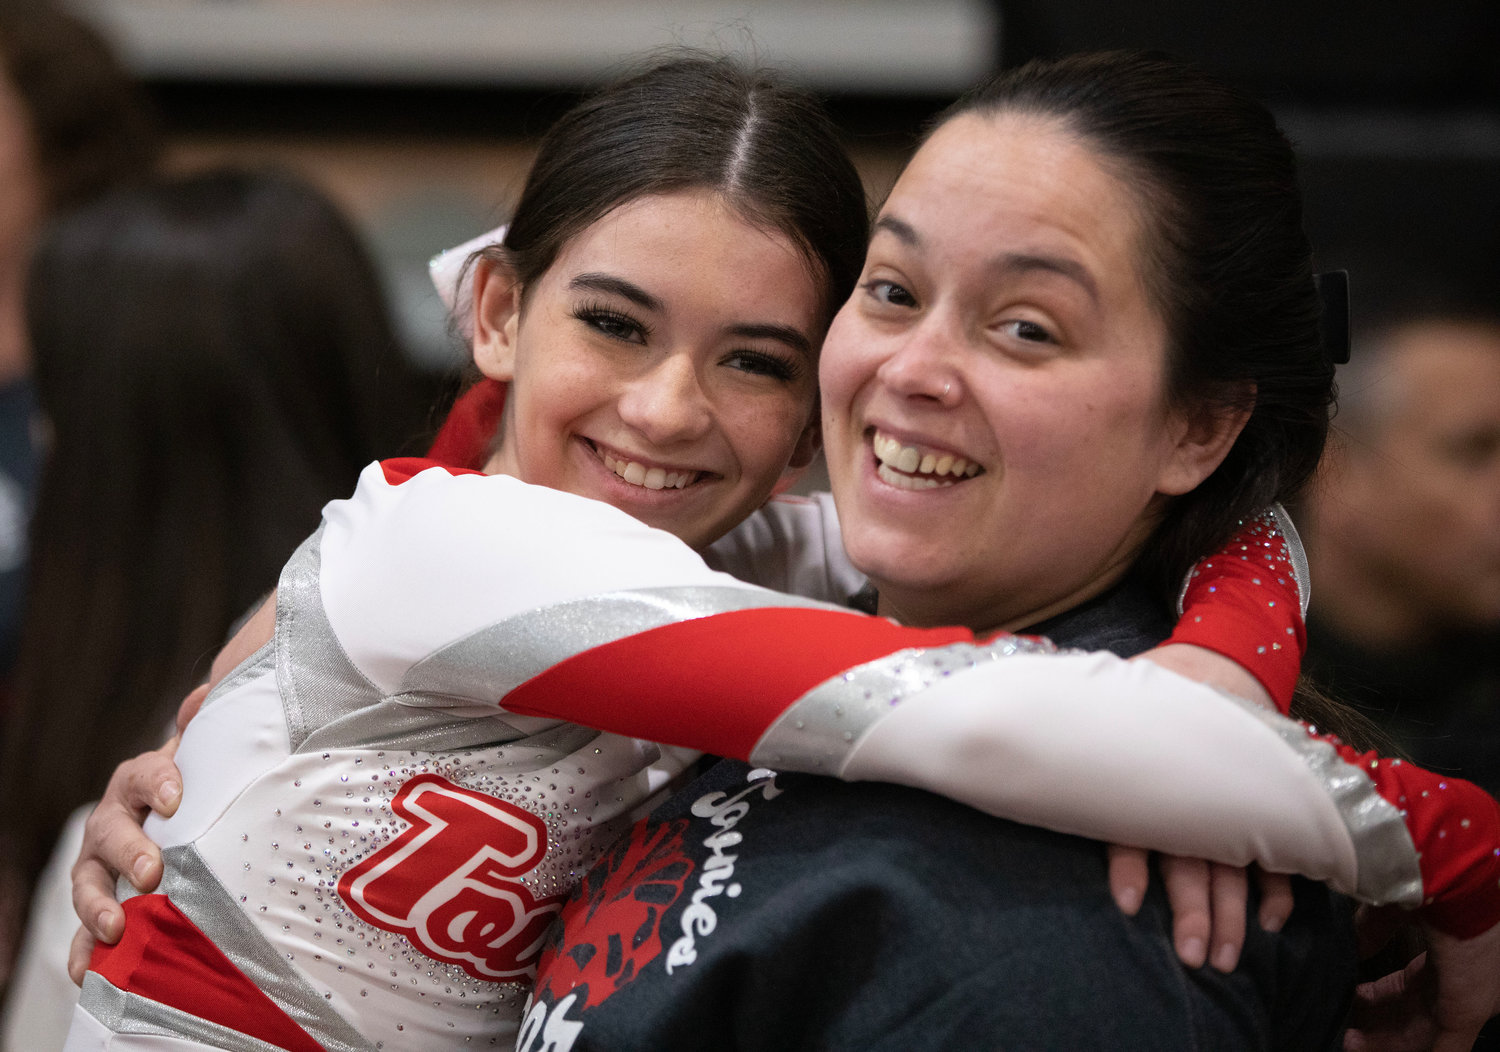 Mackenzie Pacheco receives a hug from mom Samantha Garelli after the Townies performance.